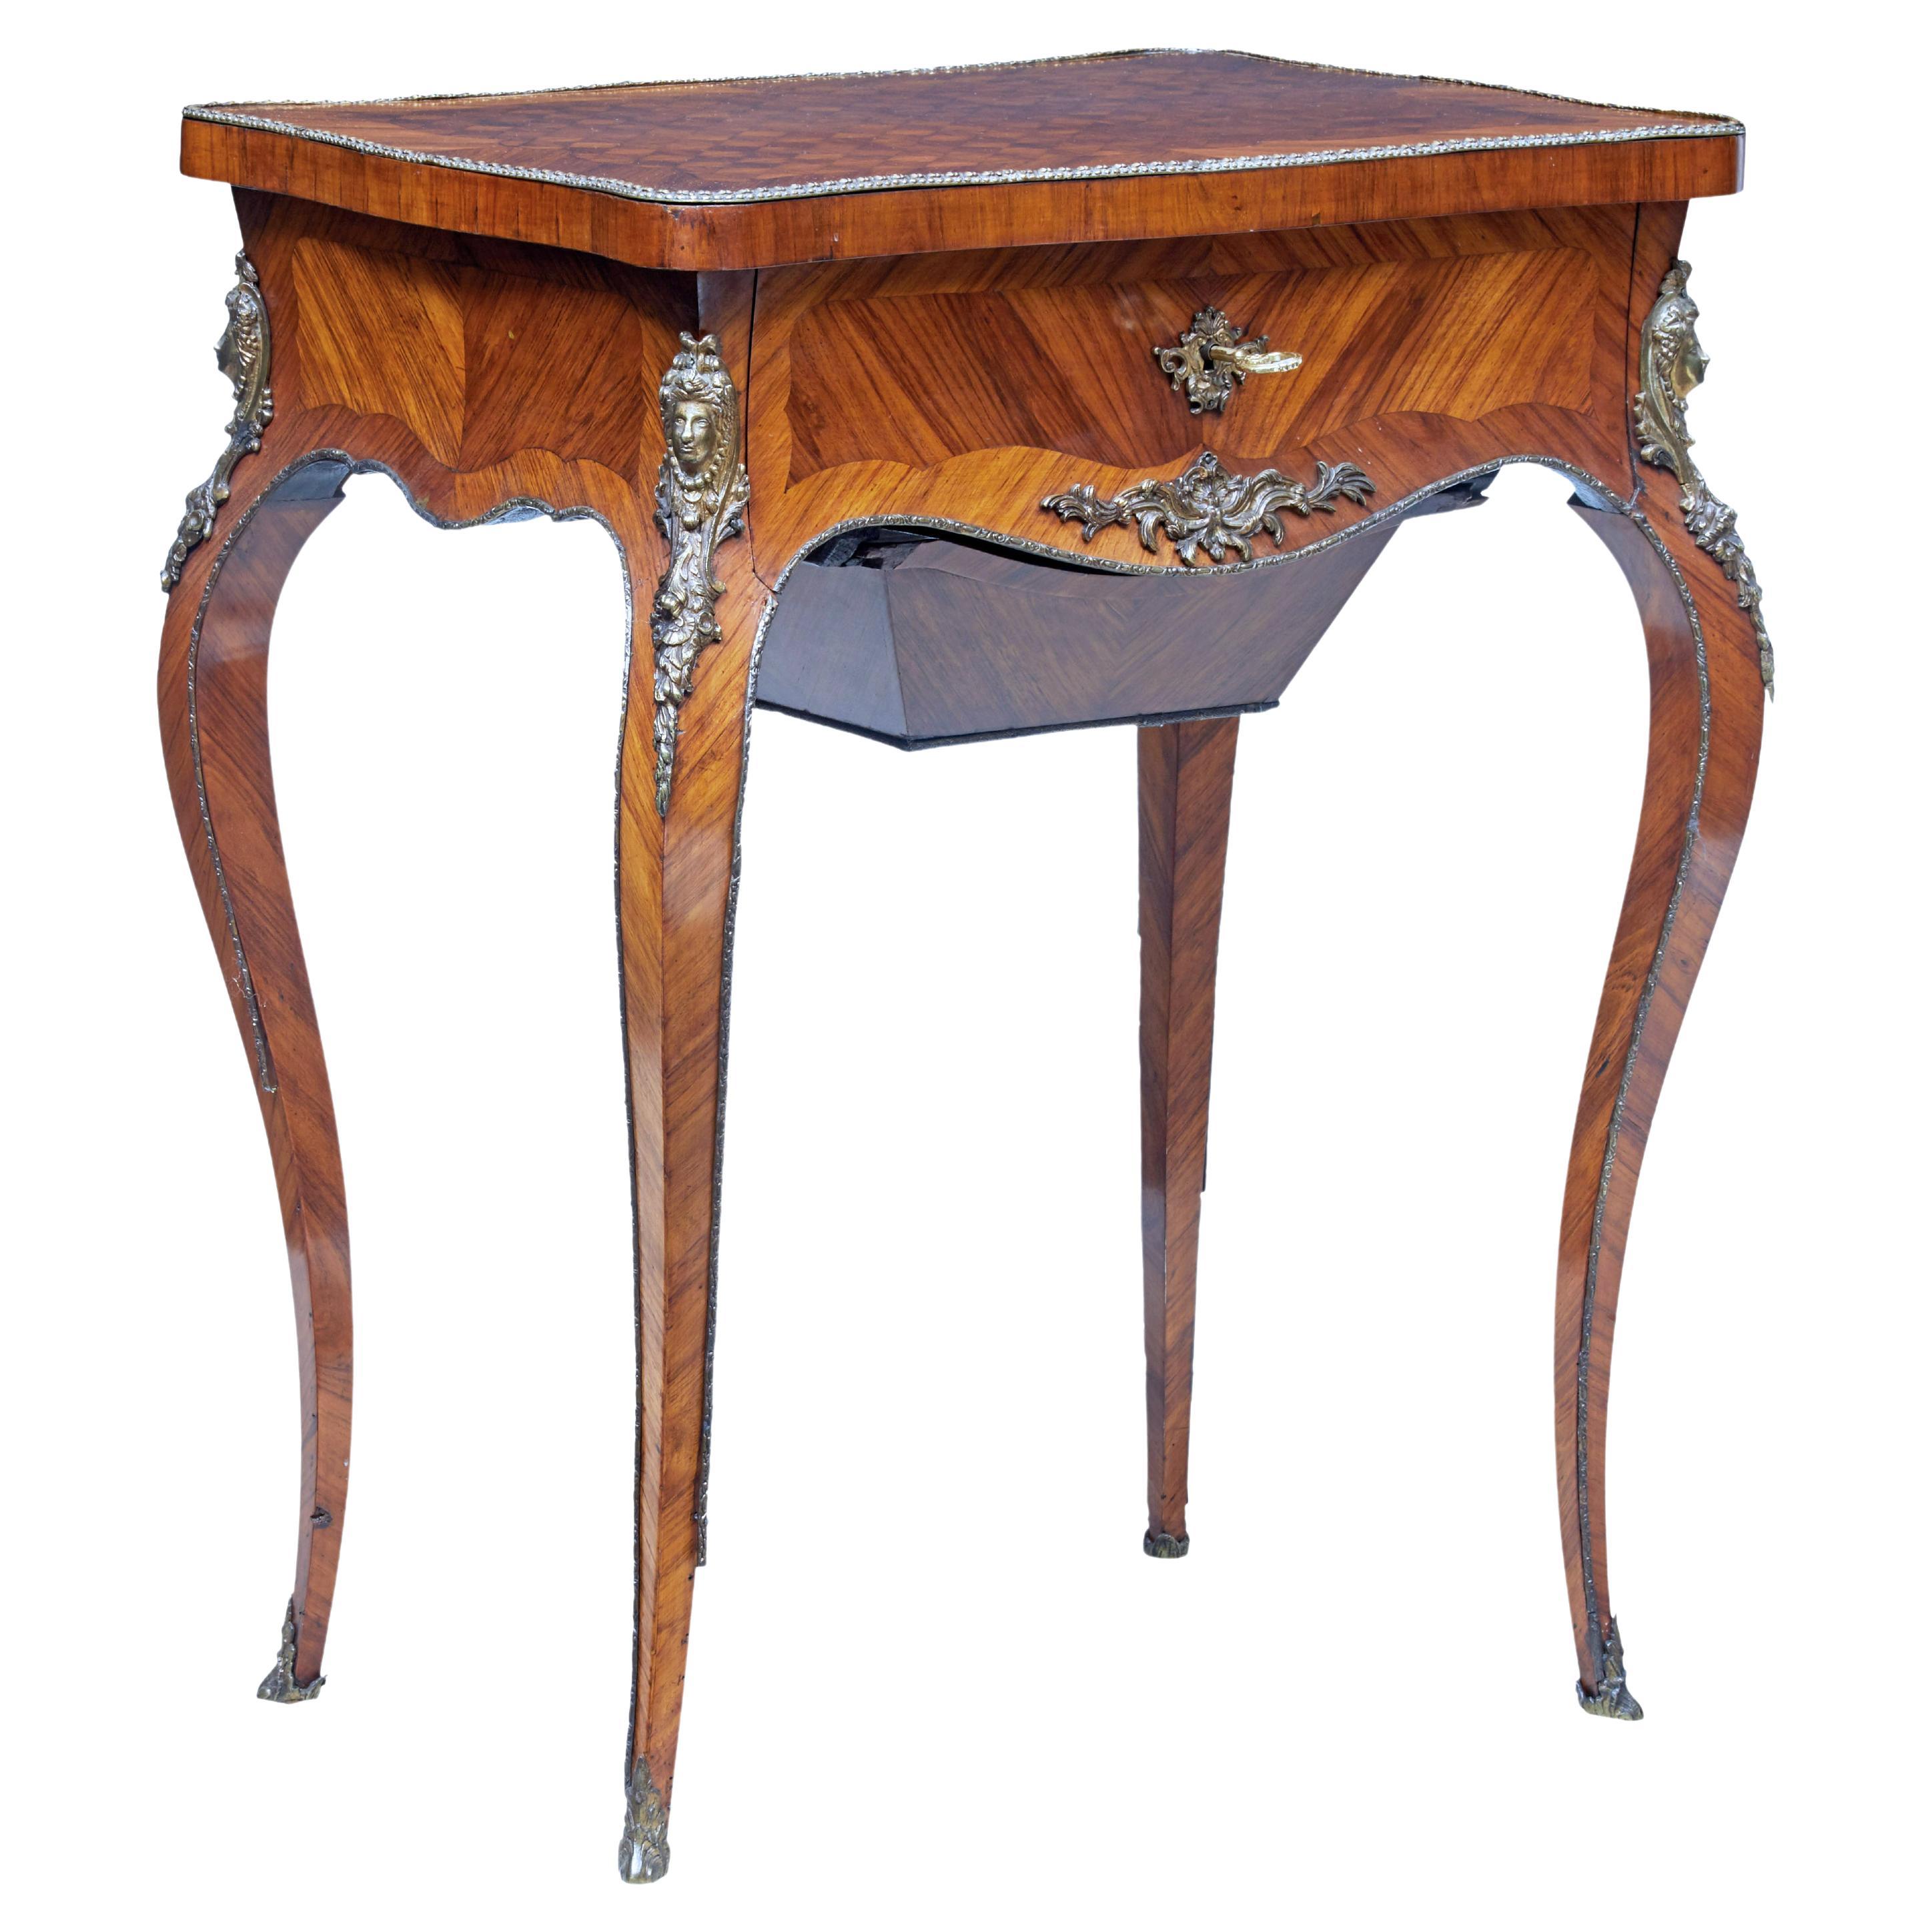 19th Century French Kingwood Sewing Work Table